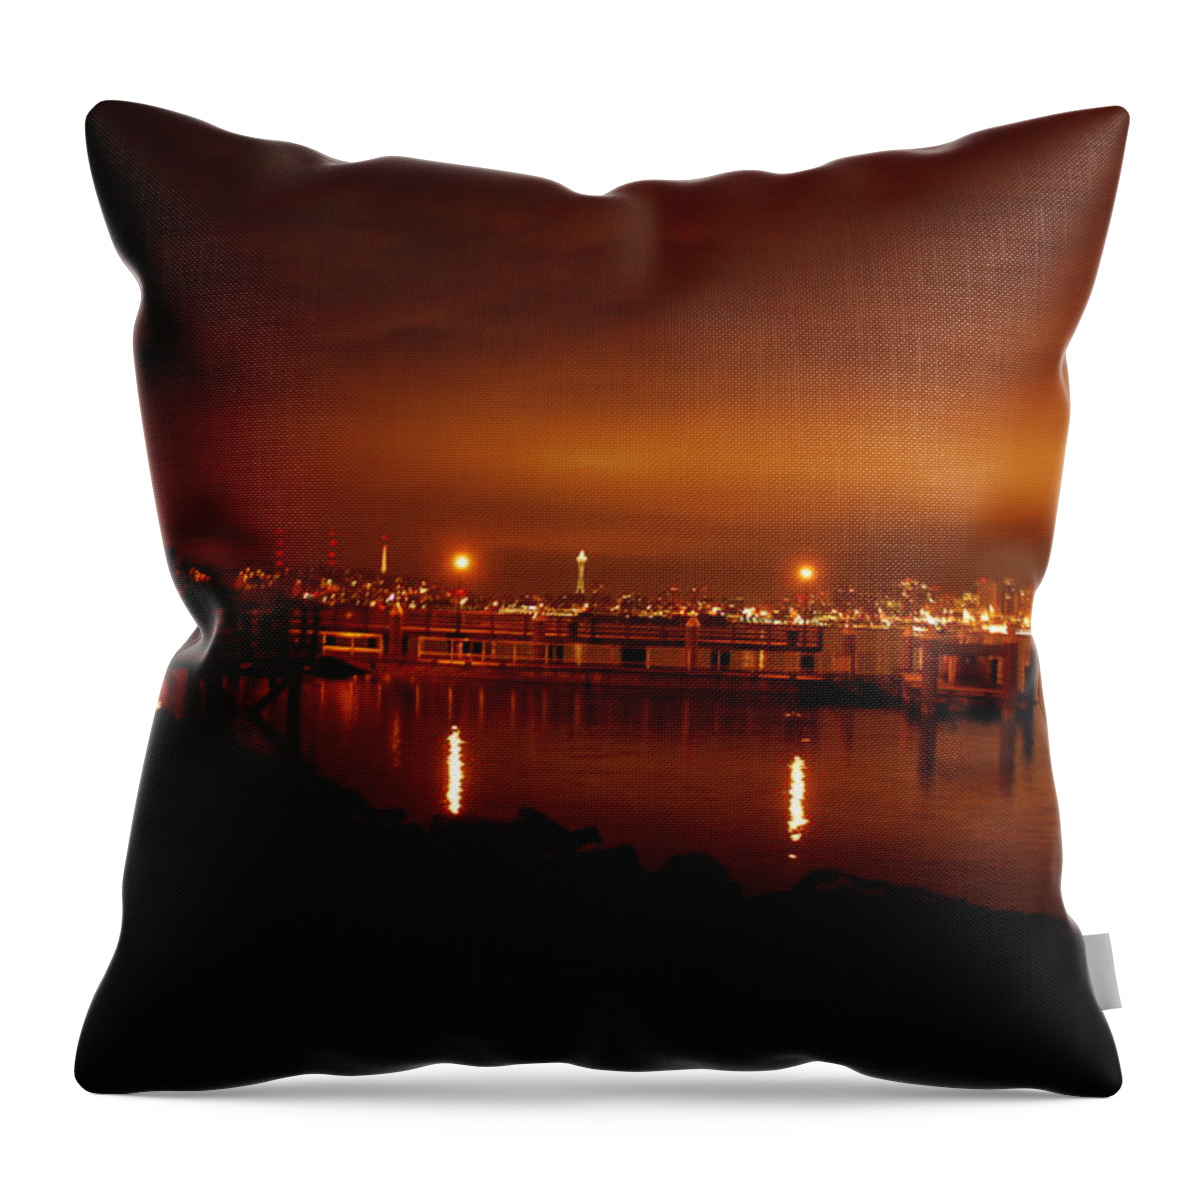 Sky Throw Pillow featuring the photograph Morning Sky by Michael Merry